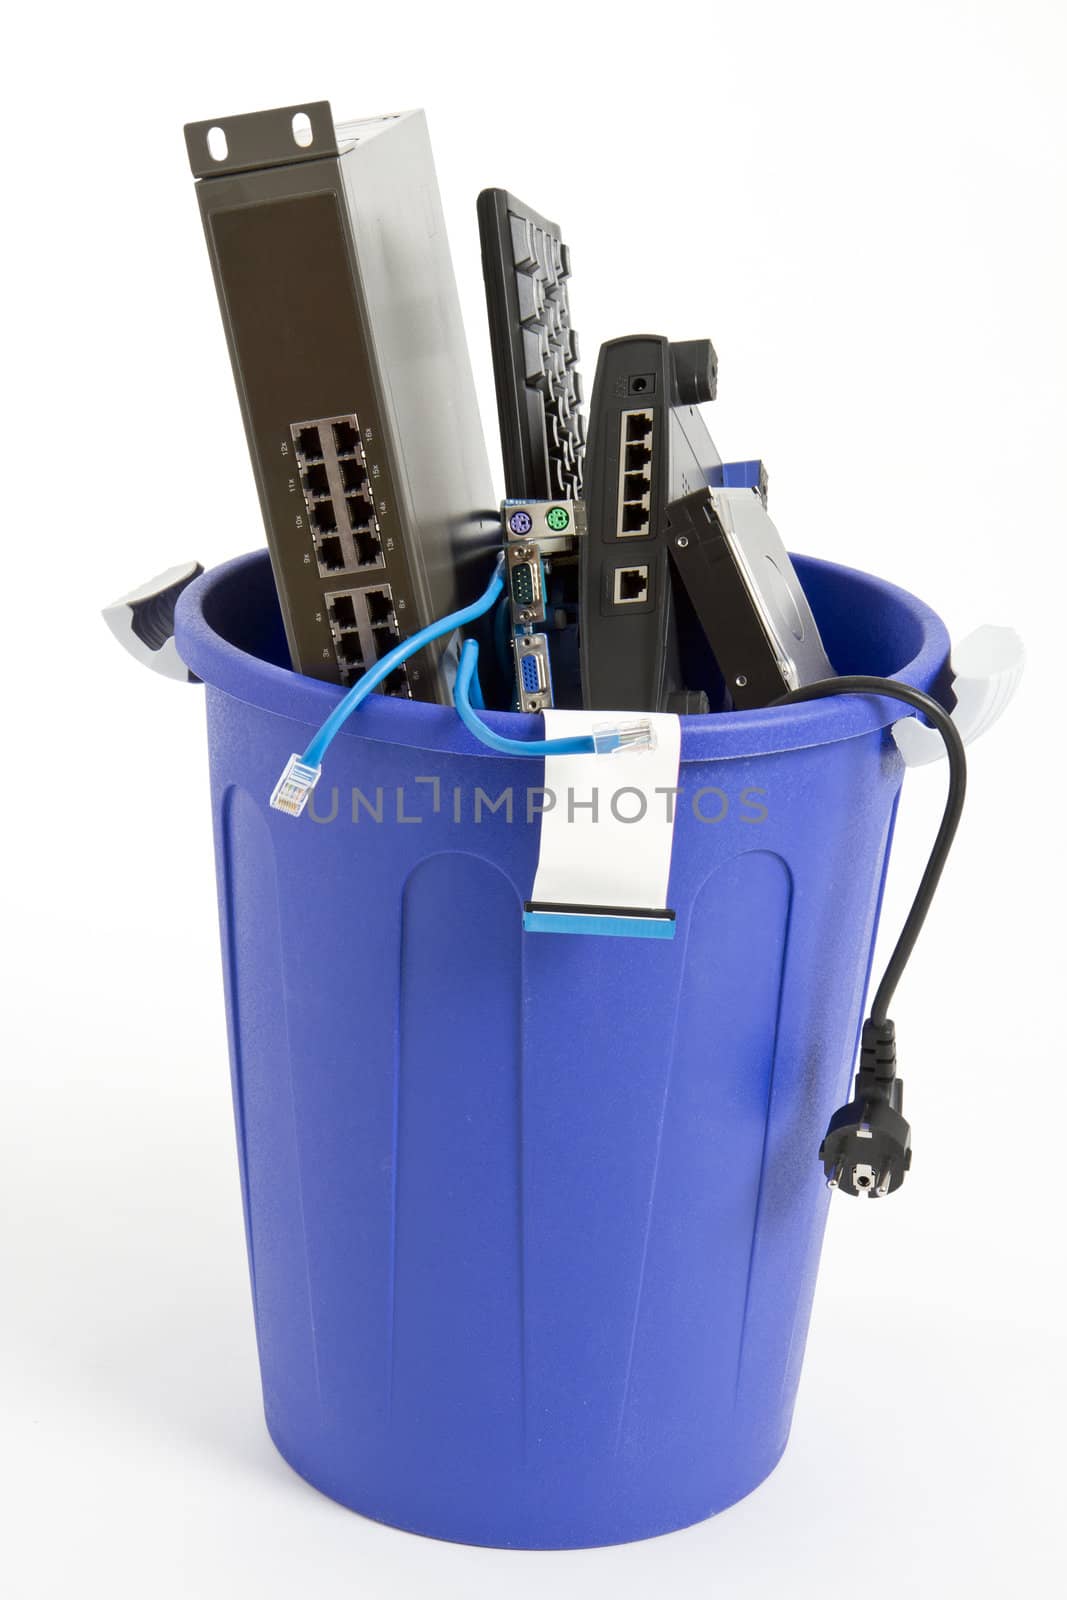 electronic scrap in trash can. keyboard, cables, logicboard, hard drive - isolated on white background